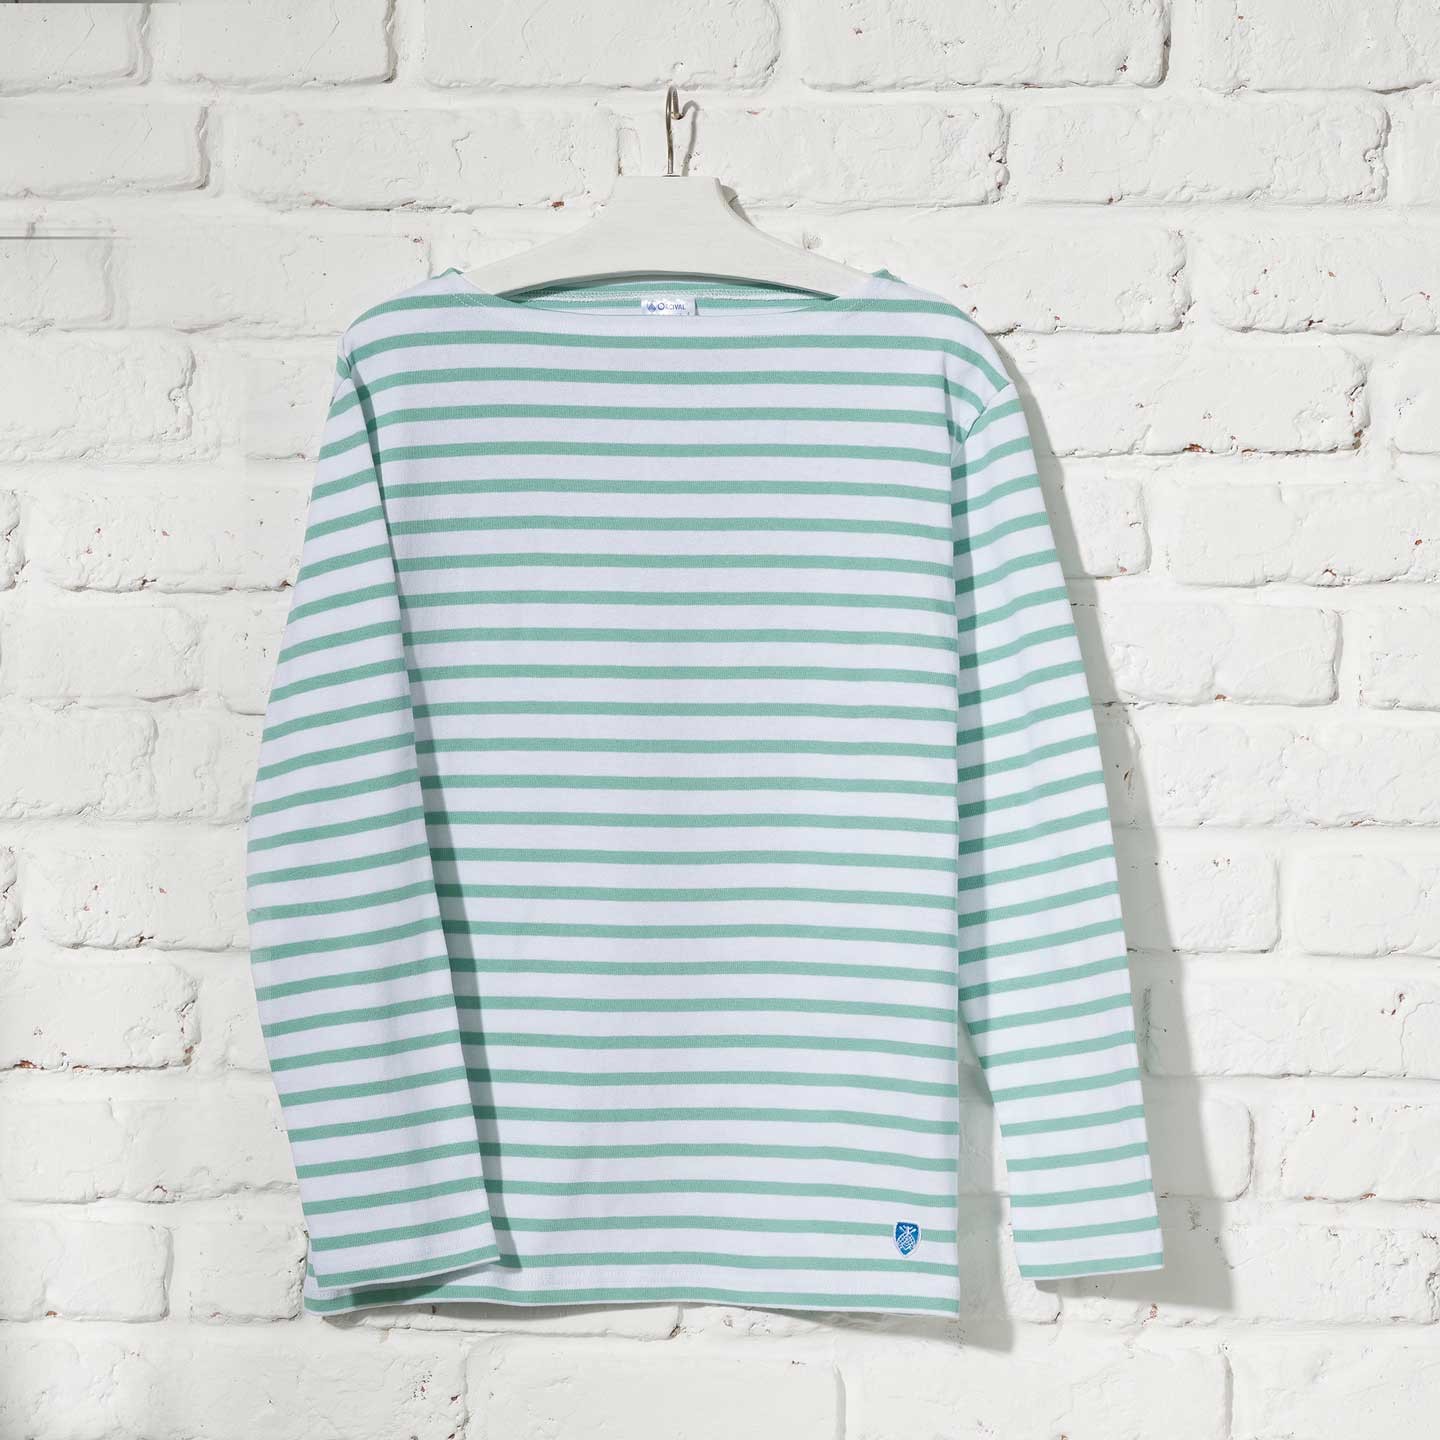 Striped shirt White / Jade, unisex made in France Orcival